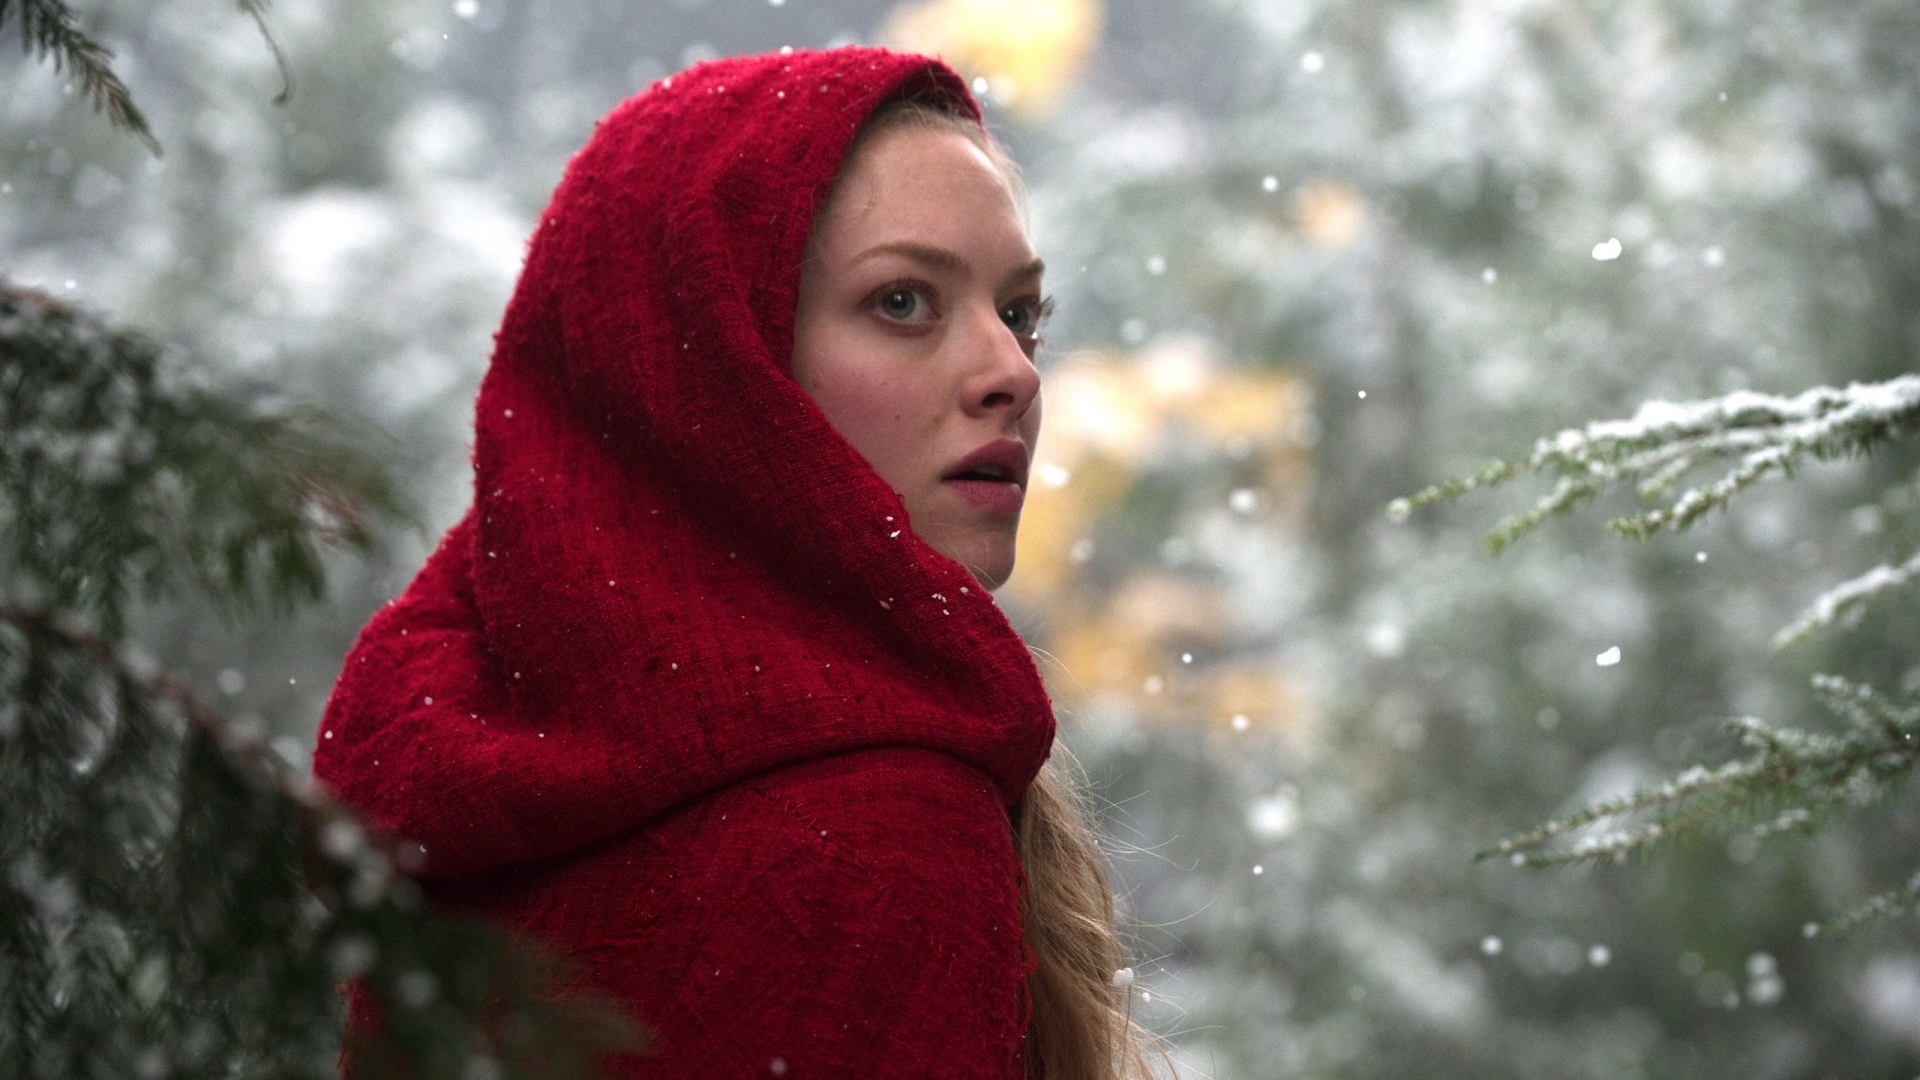 Red Riding Hood Movie for 1920 x 1080 HDTV 1080p resolution